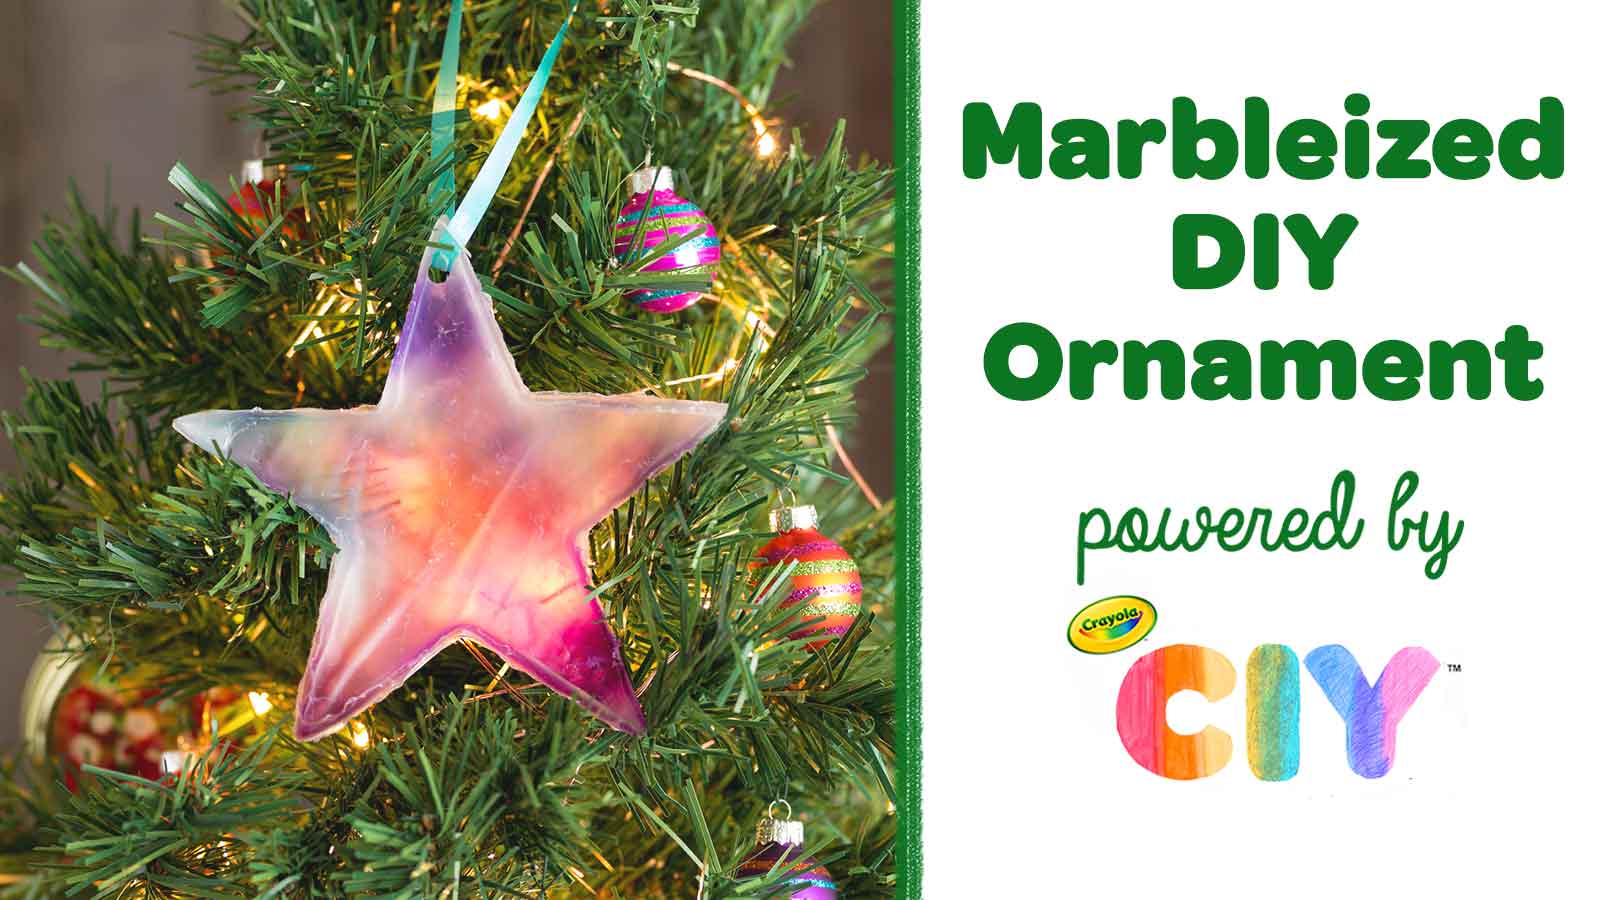 Marbleized Holiday DIY Ornament, Crafts, , Crayola CIY, DIY  Crafts for Kids and Adults